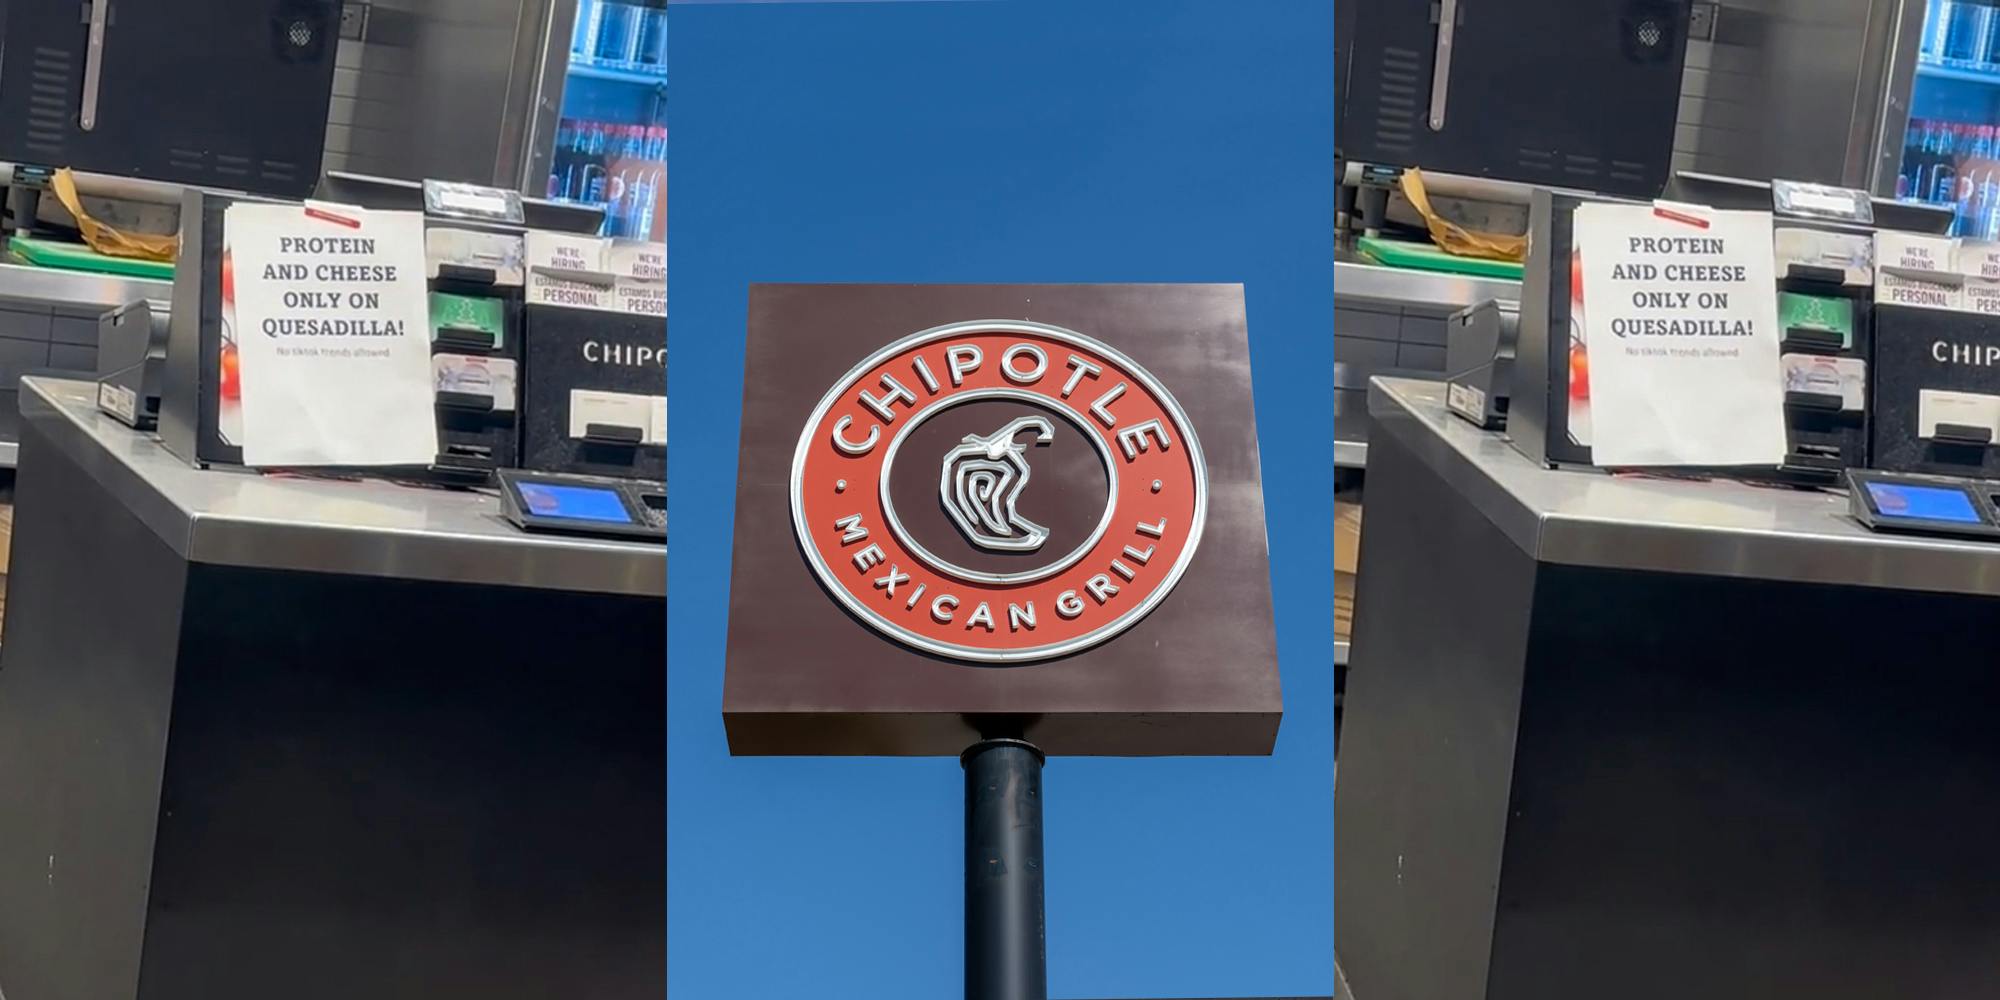 sign on Chipotle counter "PROTEIN AND CHEESE ONLY ON QUESADILLA" (l) Chipotle sign in front of blue sky (c) sign on Chipotle counter "PROTEIN AND CHEESE ONLY ON QUESADILLA" (r)